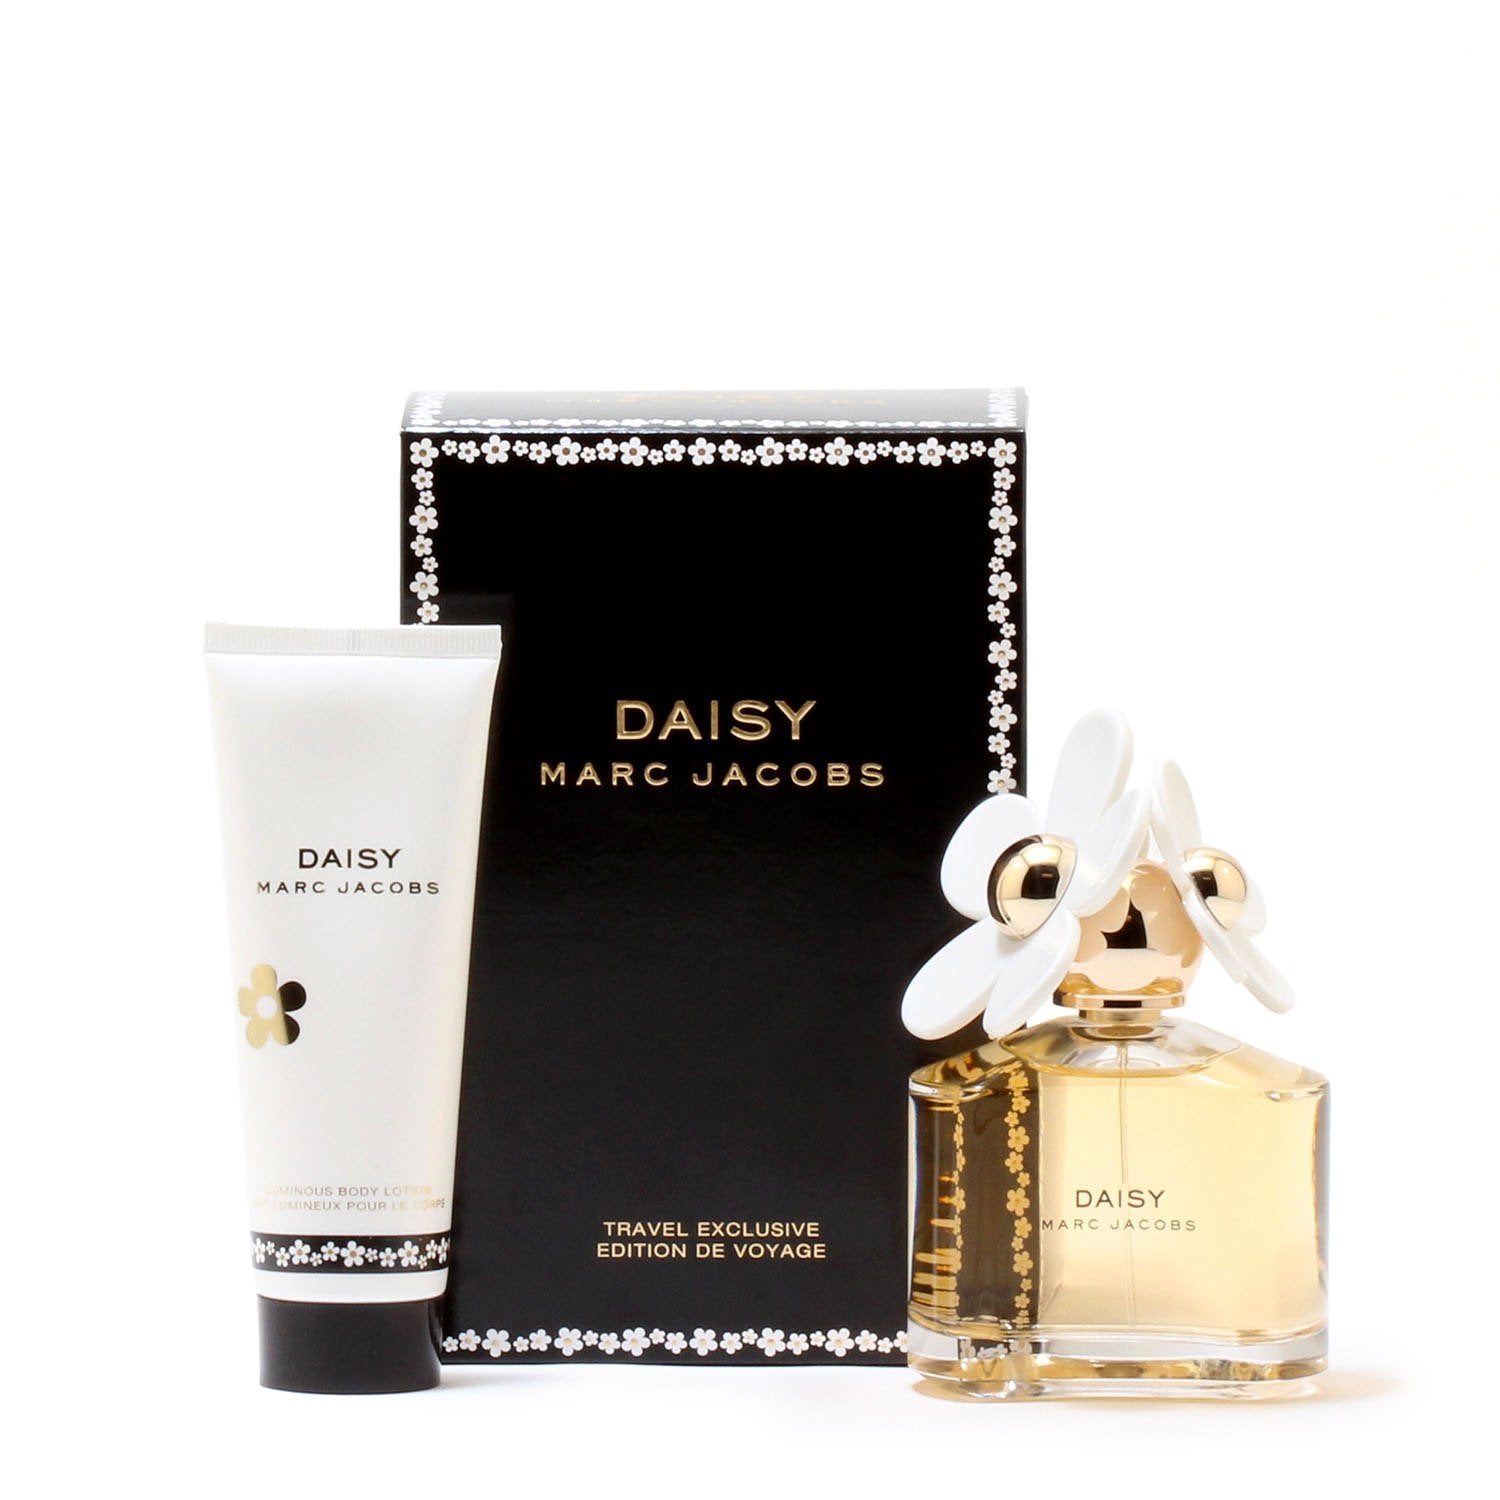 DAISY FOR WOMEN BY MARC JACOBS - TRAVEL EDITION GIFT SET